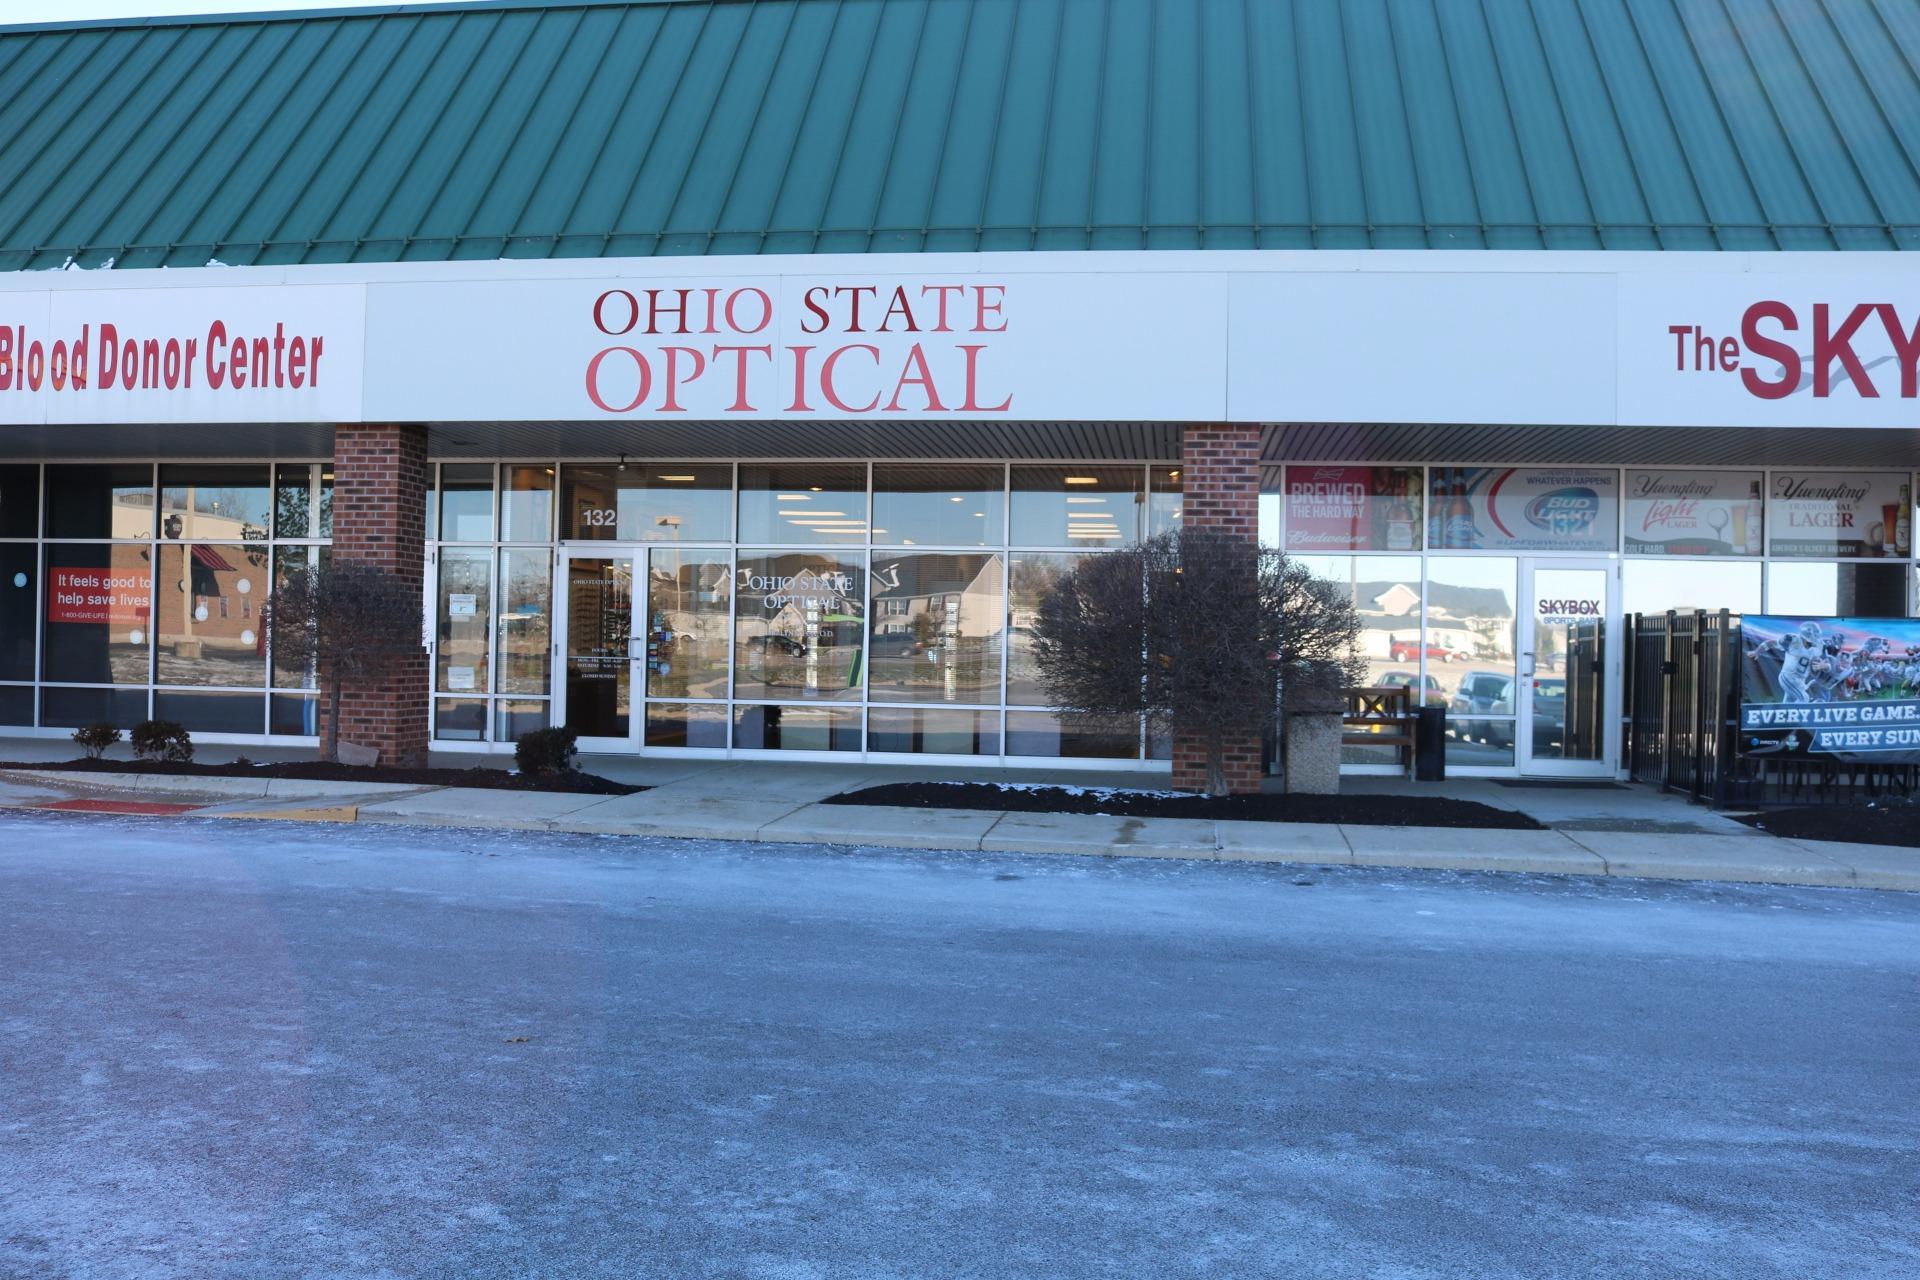 Our entrance! Ohio State Optical Lewis Center (614)888-3972